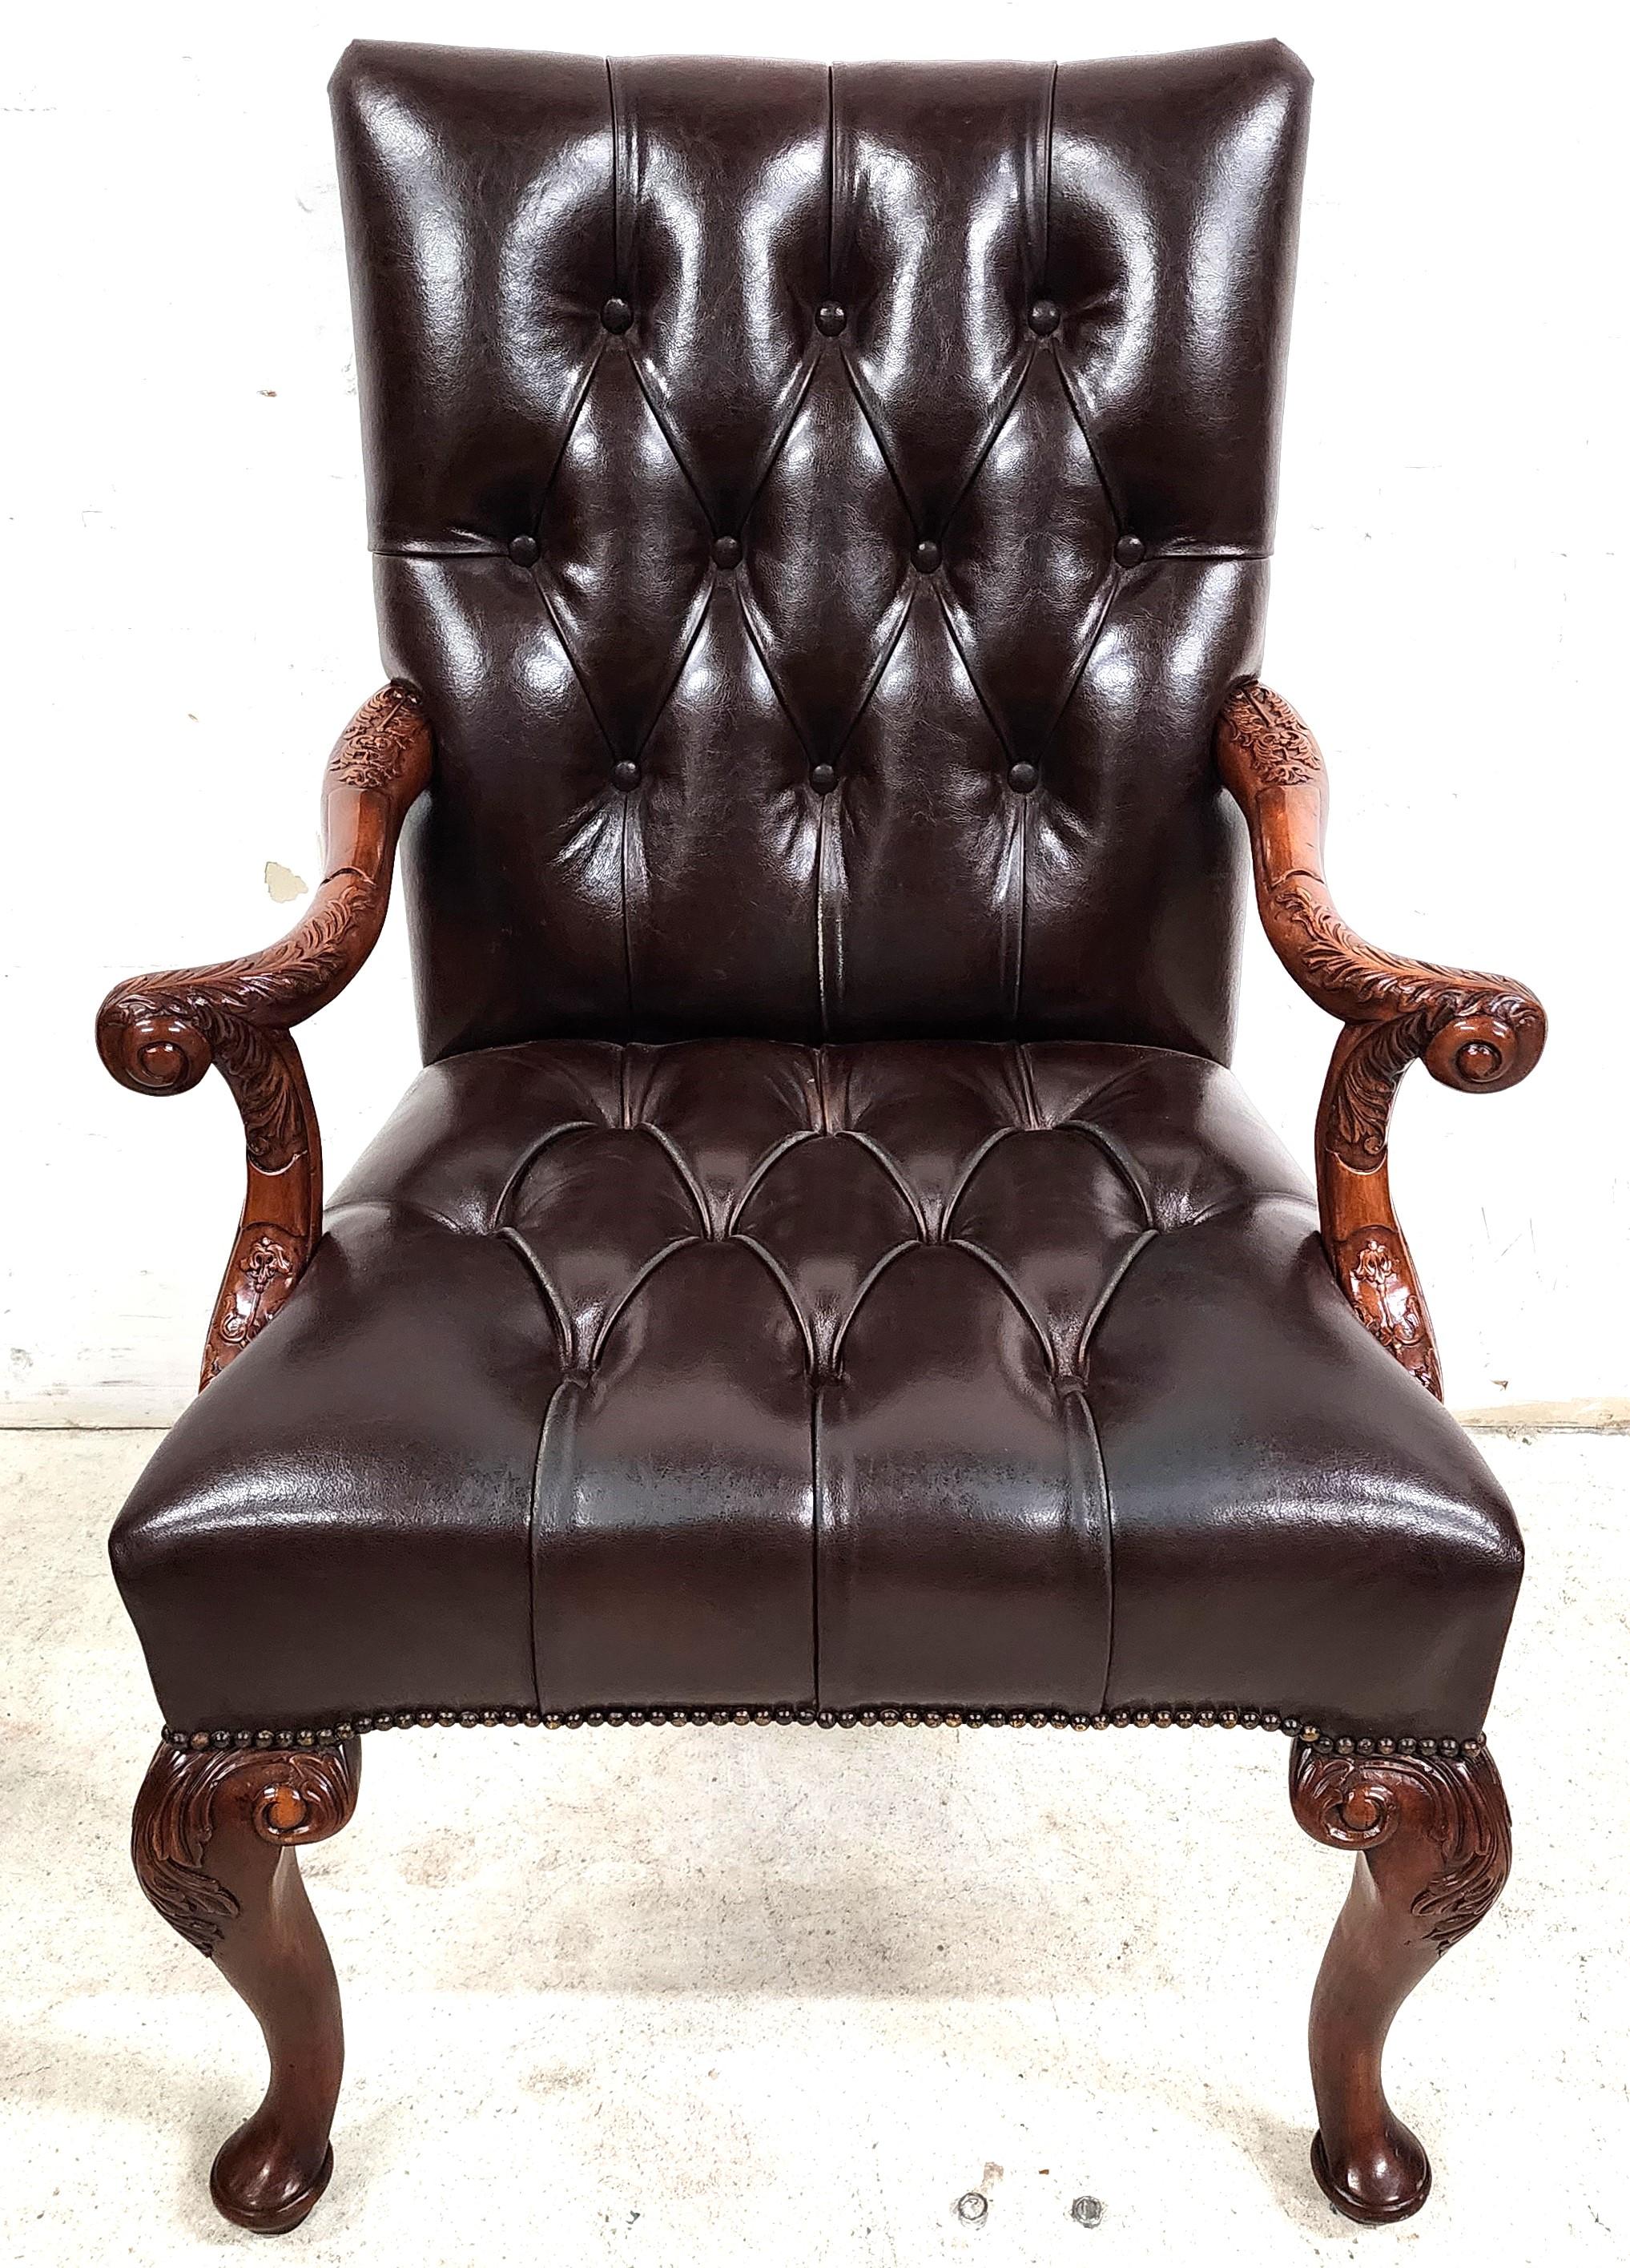 For FULL item description click on CONTINUE READING at the bottom of this page.

Offering One Of Our Recent Palm Beach Estate Fine Furniture Acquisitions Of An
Exceptional English Style Top Grain Leather Library Desk Armchair by Theodore